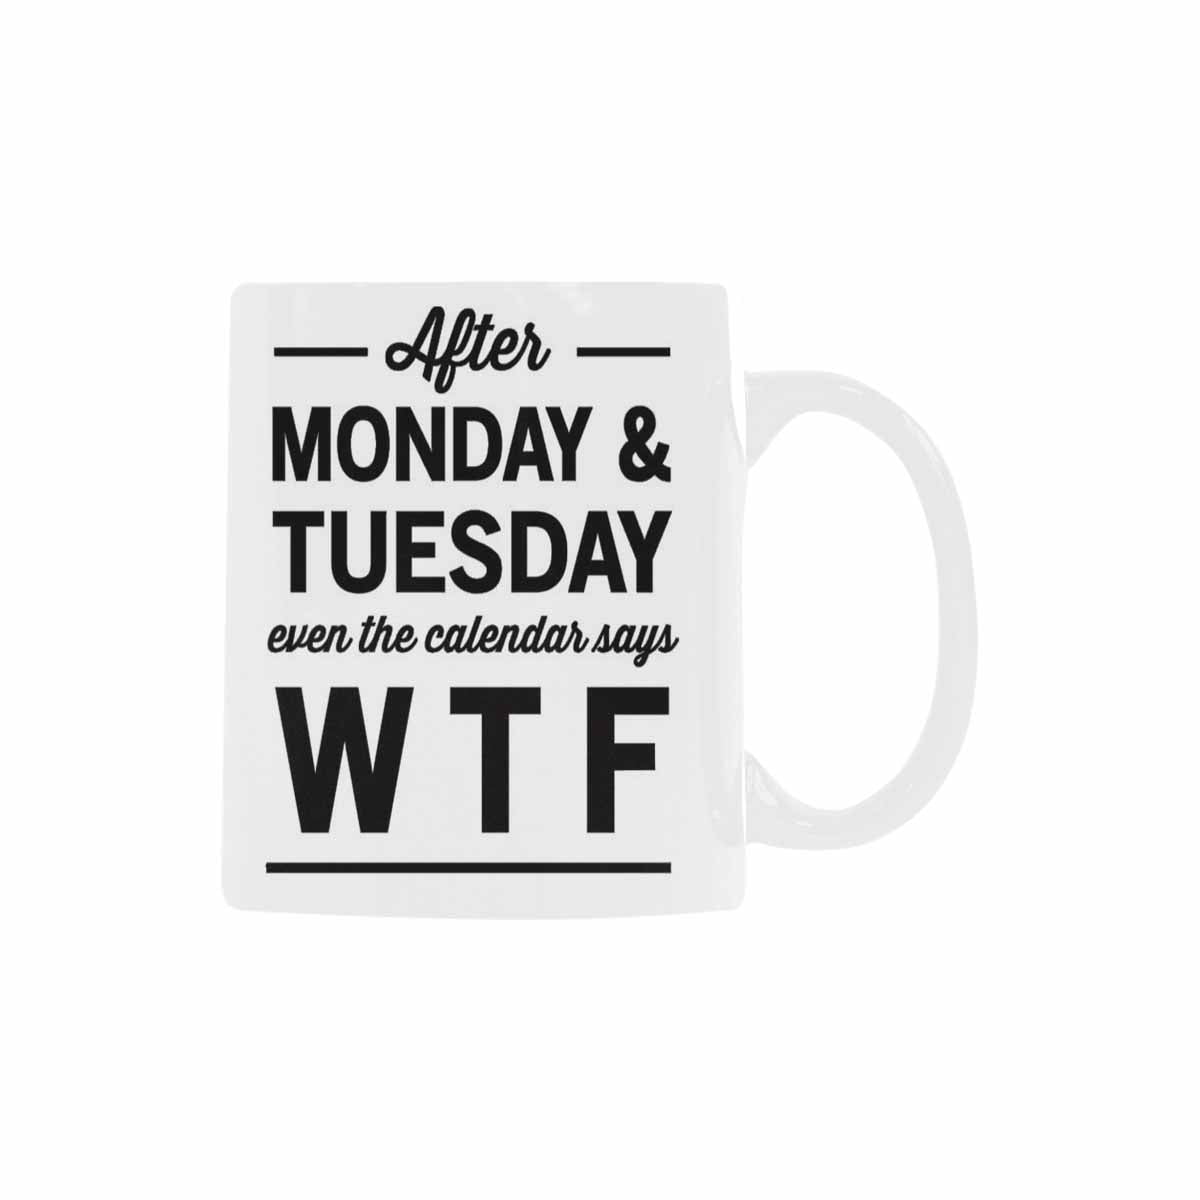 SUNENAT Funny Quotes Ceramic White Coffee Mugs 11 Fl Oz, After Monday and  Tuesday WTF Coffee Mug Sarcastic Funny Mug with Sayings 